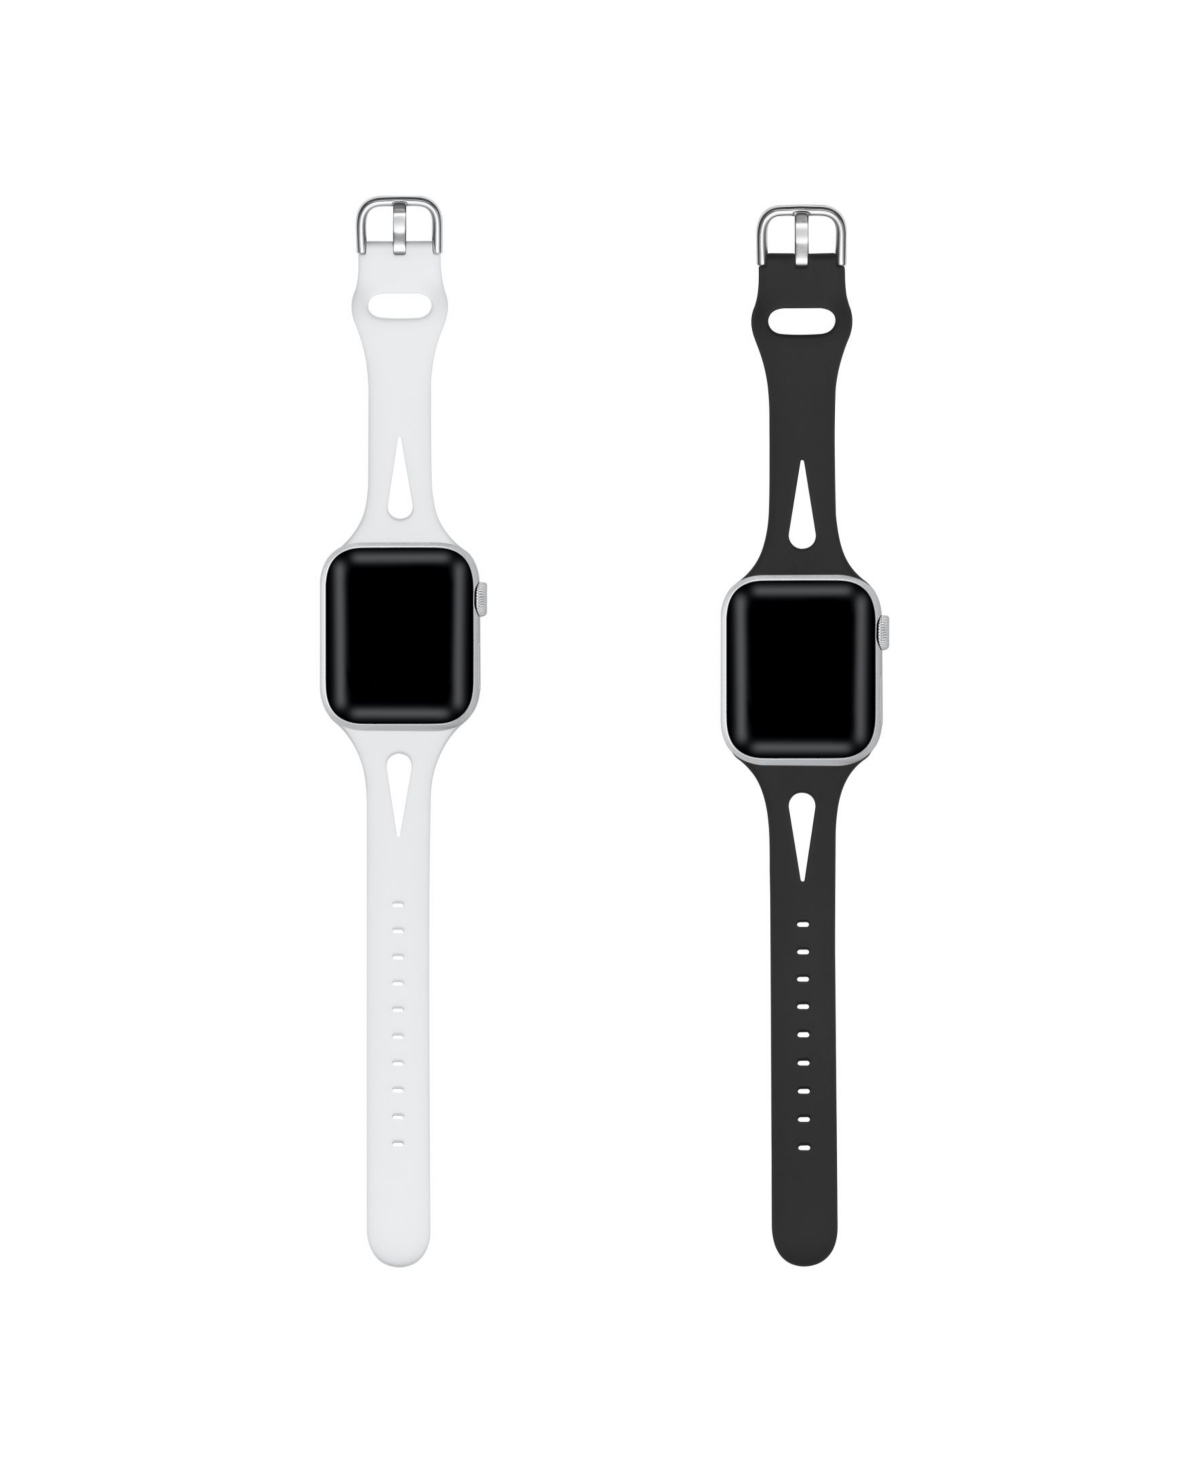 Alex 2-Pack White and Black Silicone Bands for Apple Watch, 38mm-40mm - White, Black